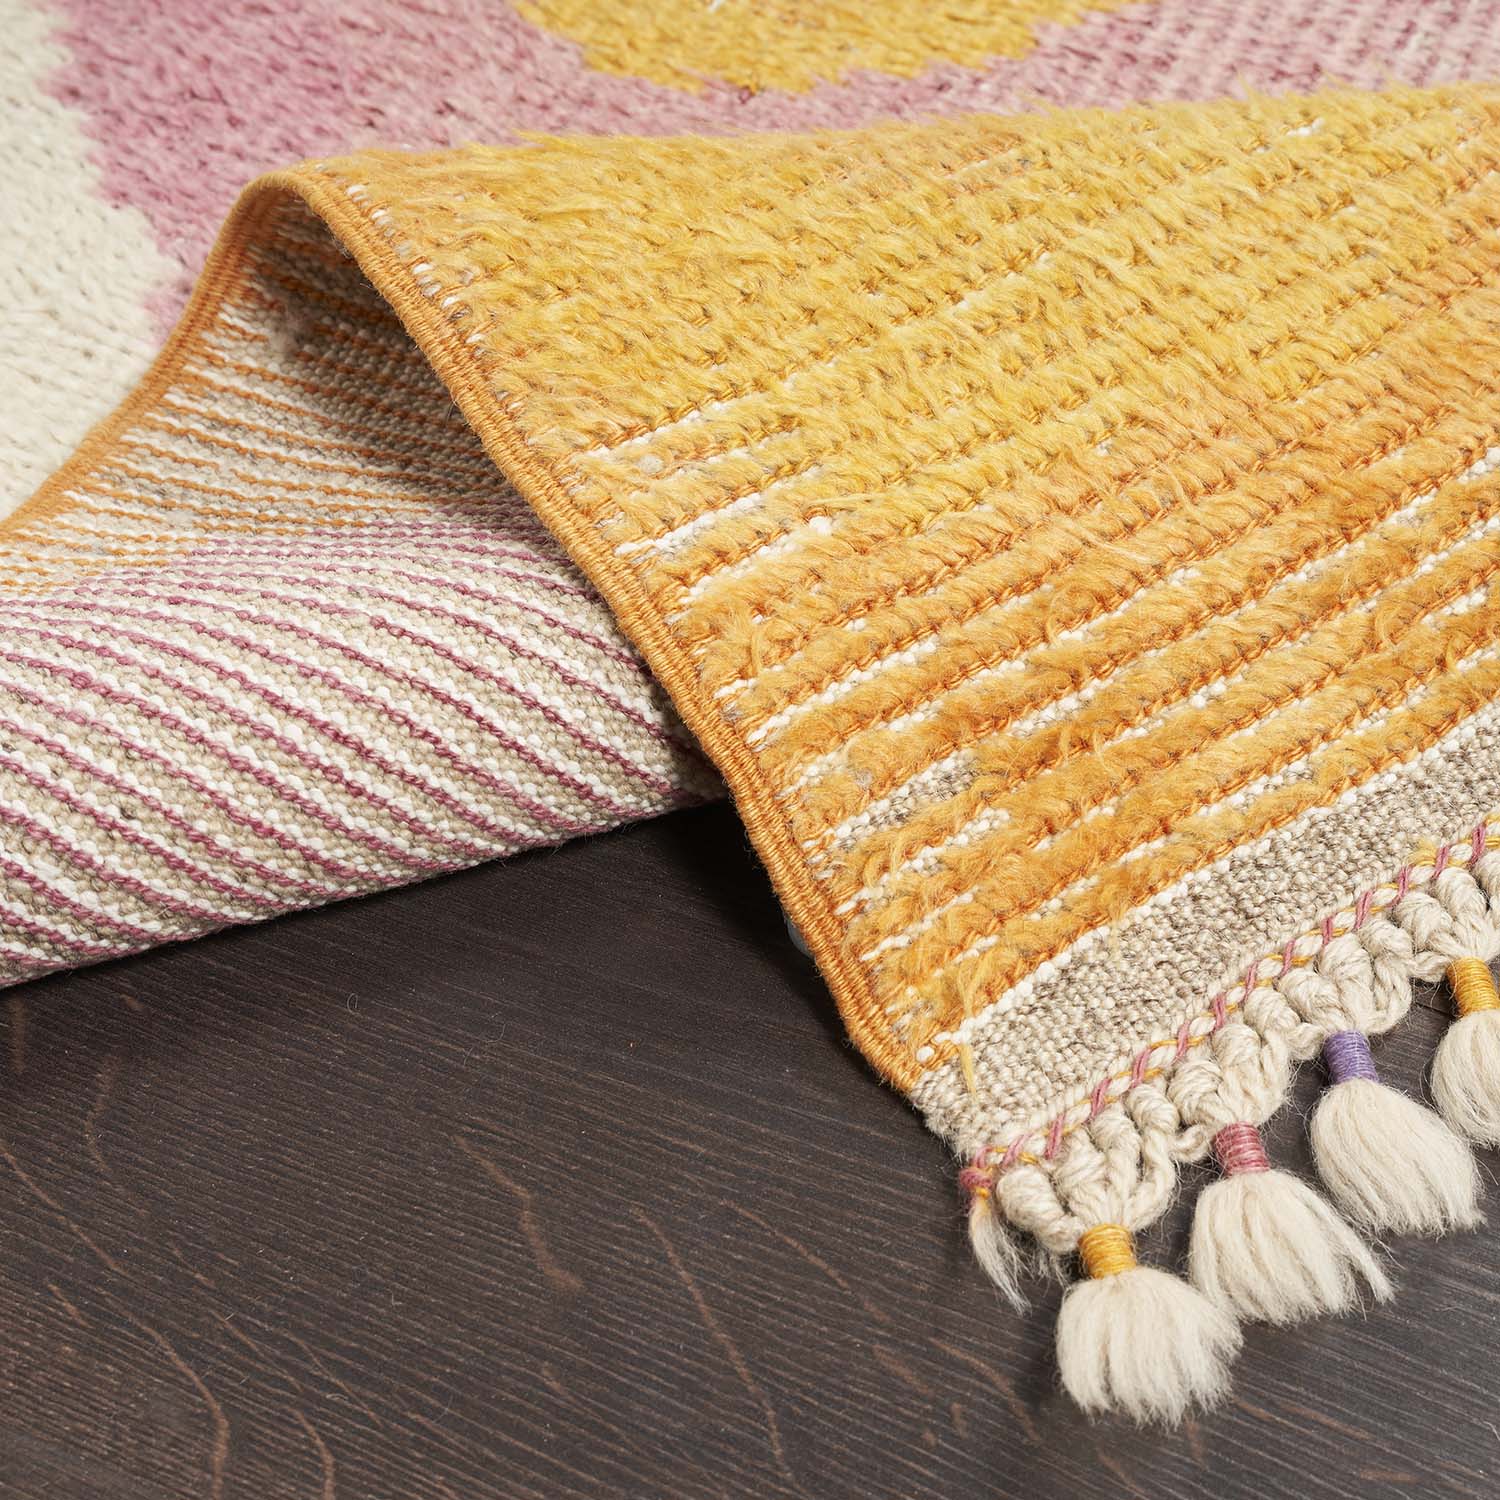 Close-up of vibrant woven rug with tassels on wooden floor.